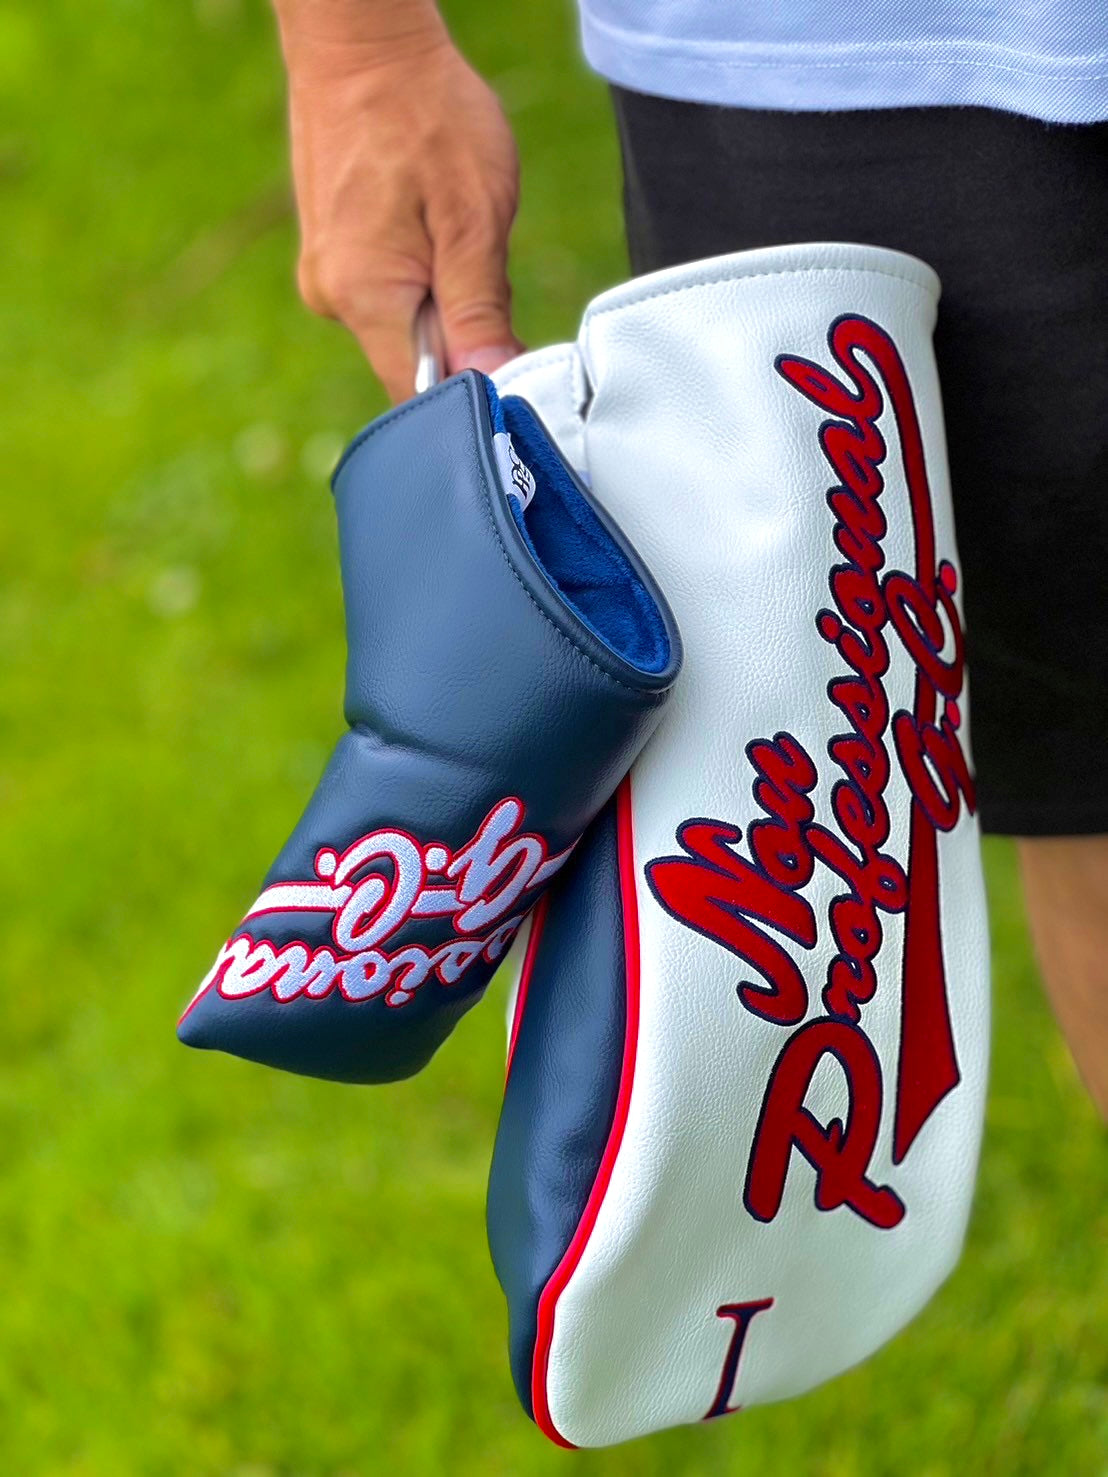 Putter Cover / Navy & White